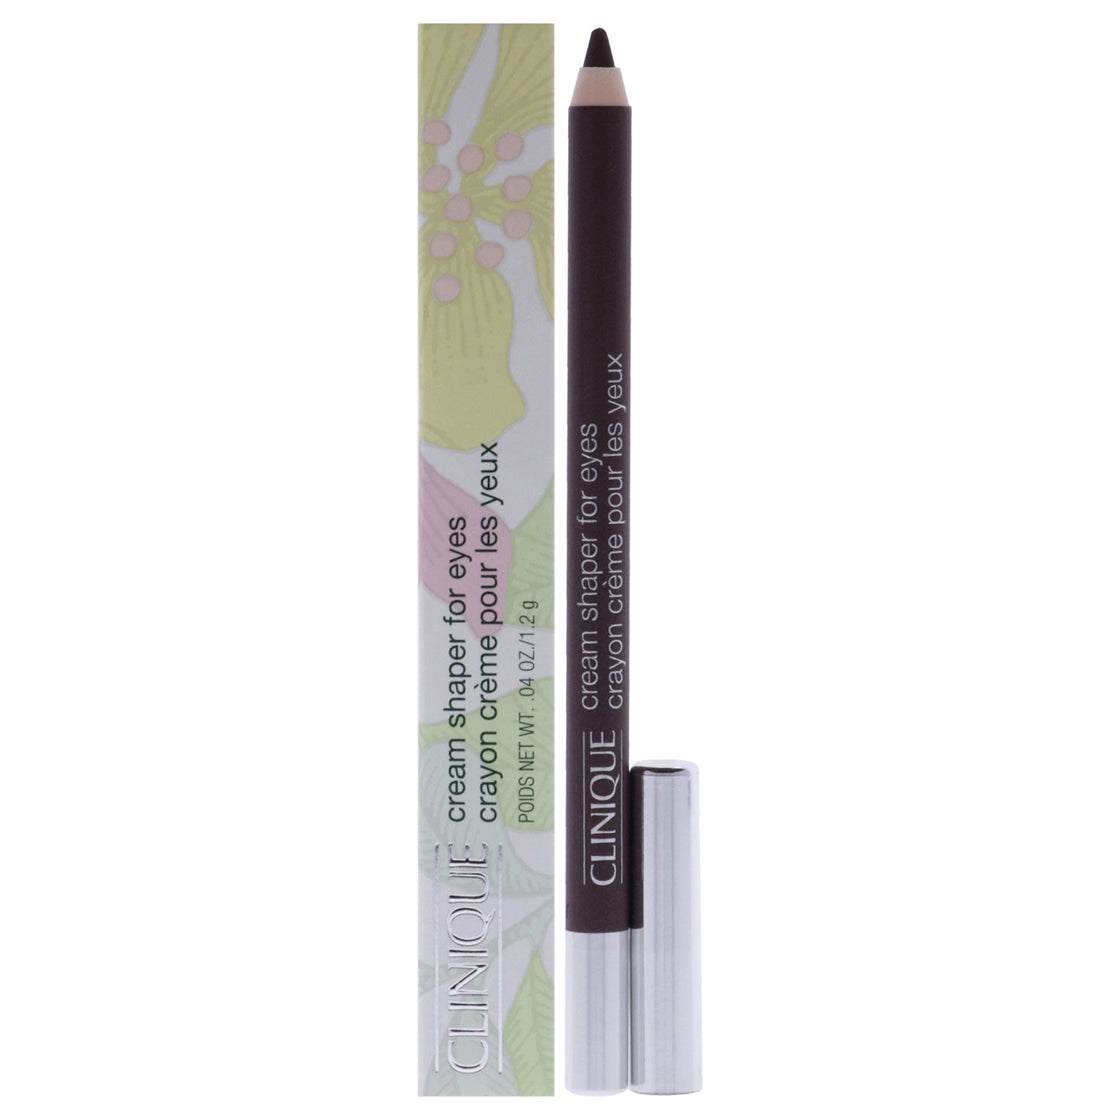 Cream Shaper For Eyes - 105 Chocolate Lustre by Clinique for Women - 0.04 oz Eyeliner